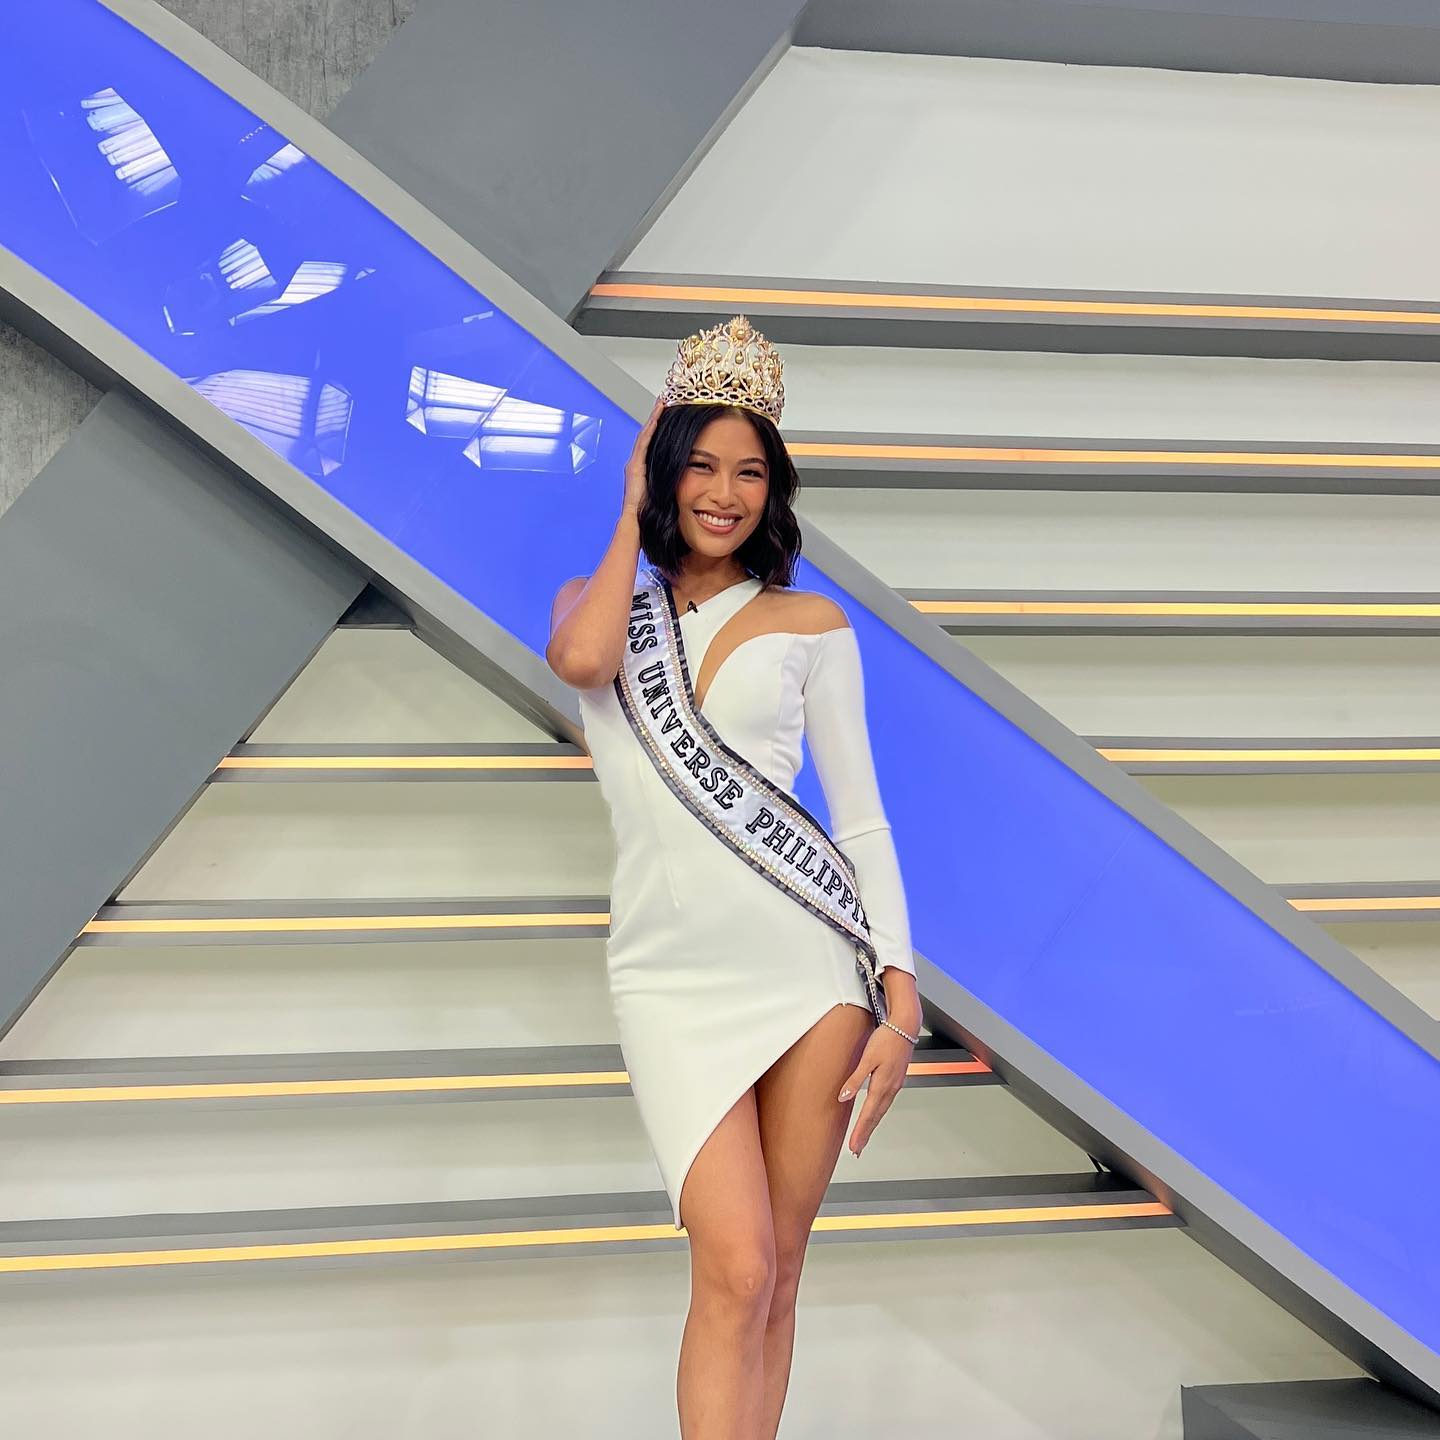 Miss Universe 2022 - Meet the candidates (France to Panama